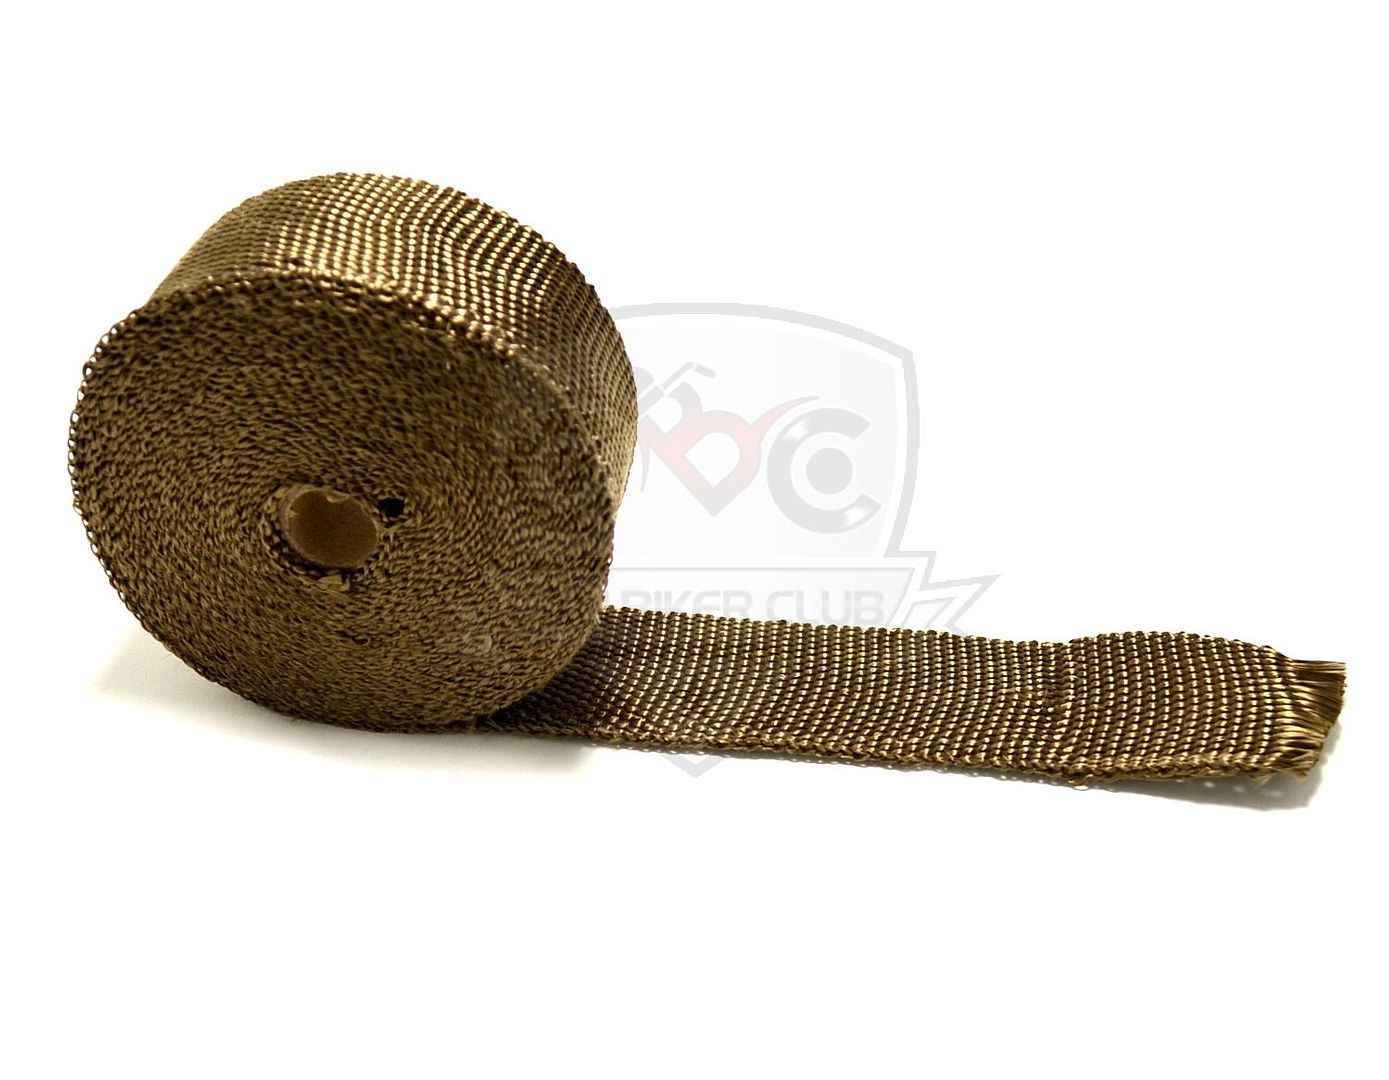  photo Titanium Exhaust Header Wrap Tape for Motorcycle Exhaust Pipes 2in x 25ft 6.jpg